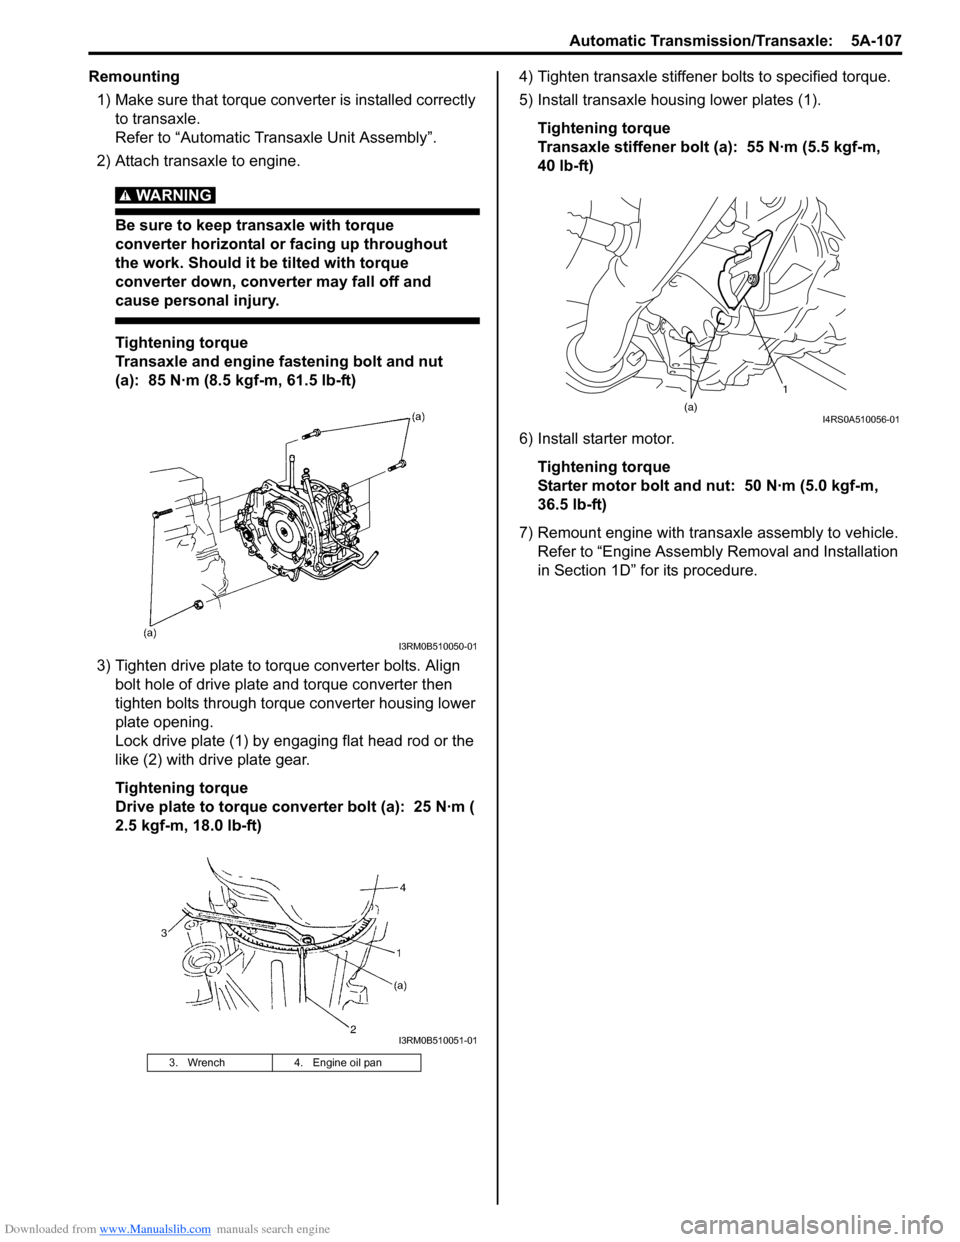 SUZUKI SWIFT 2008 2.G Service Workshop Manual Downloaded from www.Manualslib.com manuals search engine Automatic Transmission/Transaxle:  5A-107
Remounting1) Make sure that torque converter is installed correctly  to transaxle.
Refer to “Automa